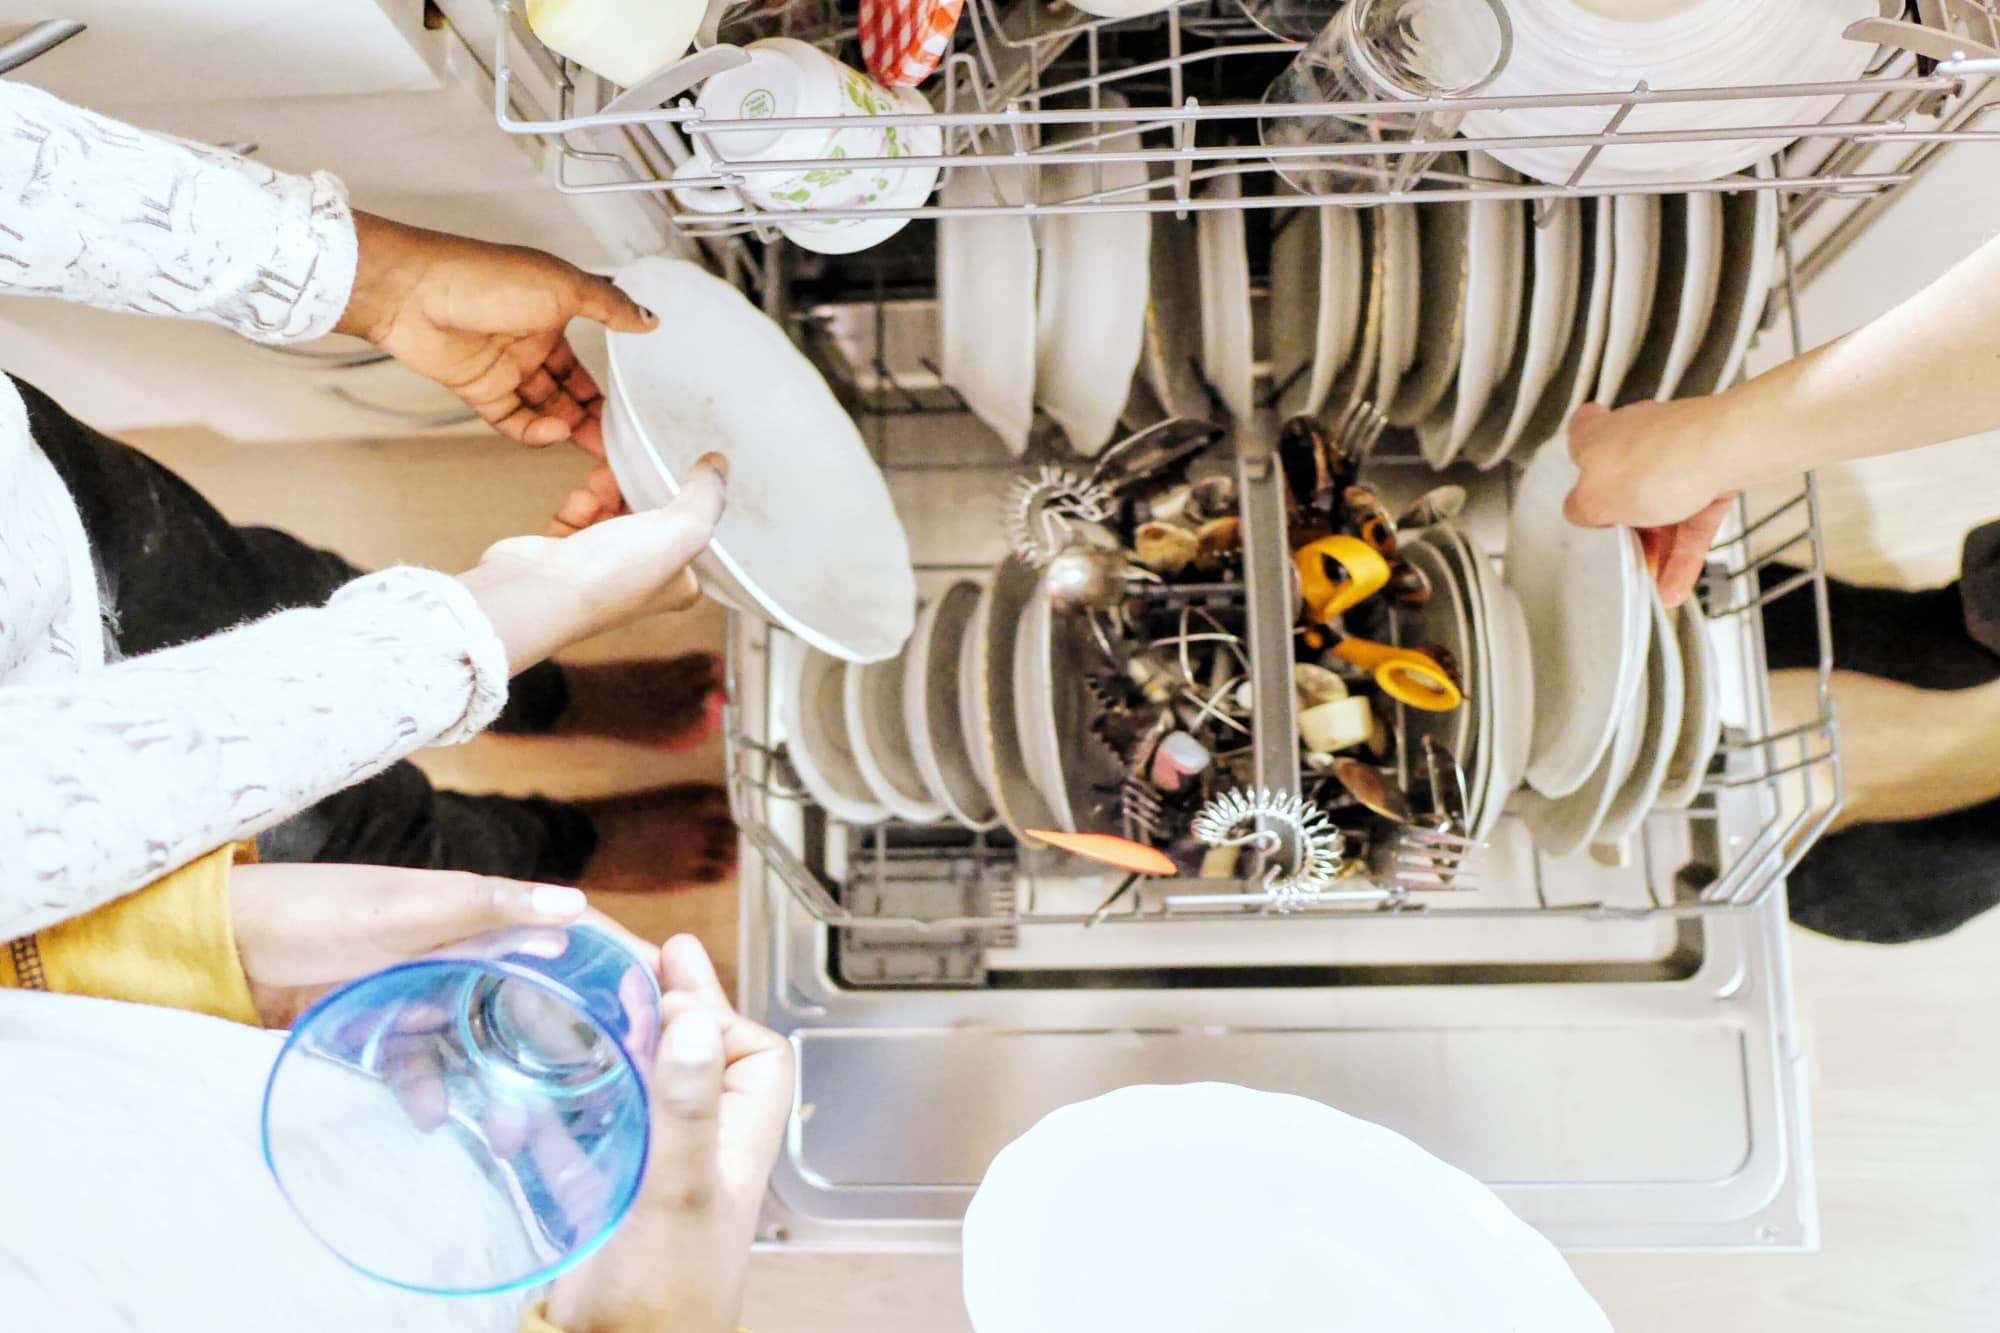 Starfix - What Not to Load Into Your Dishwasher and Why